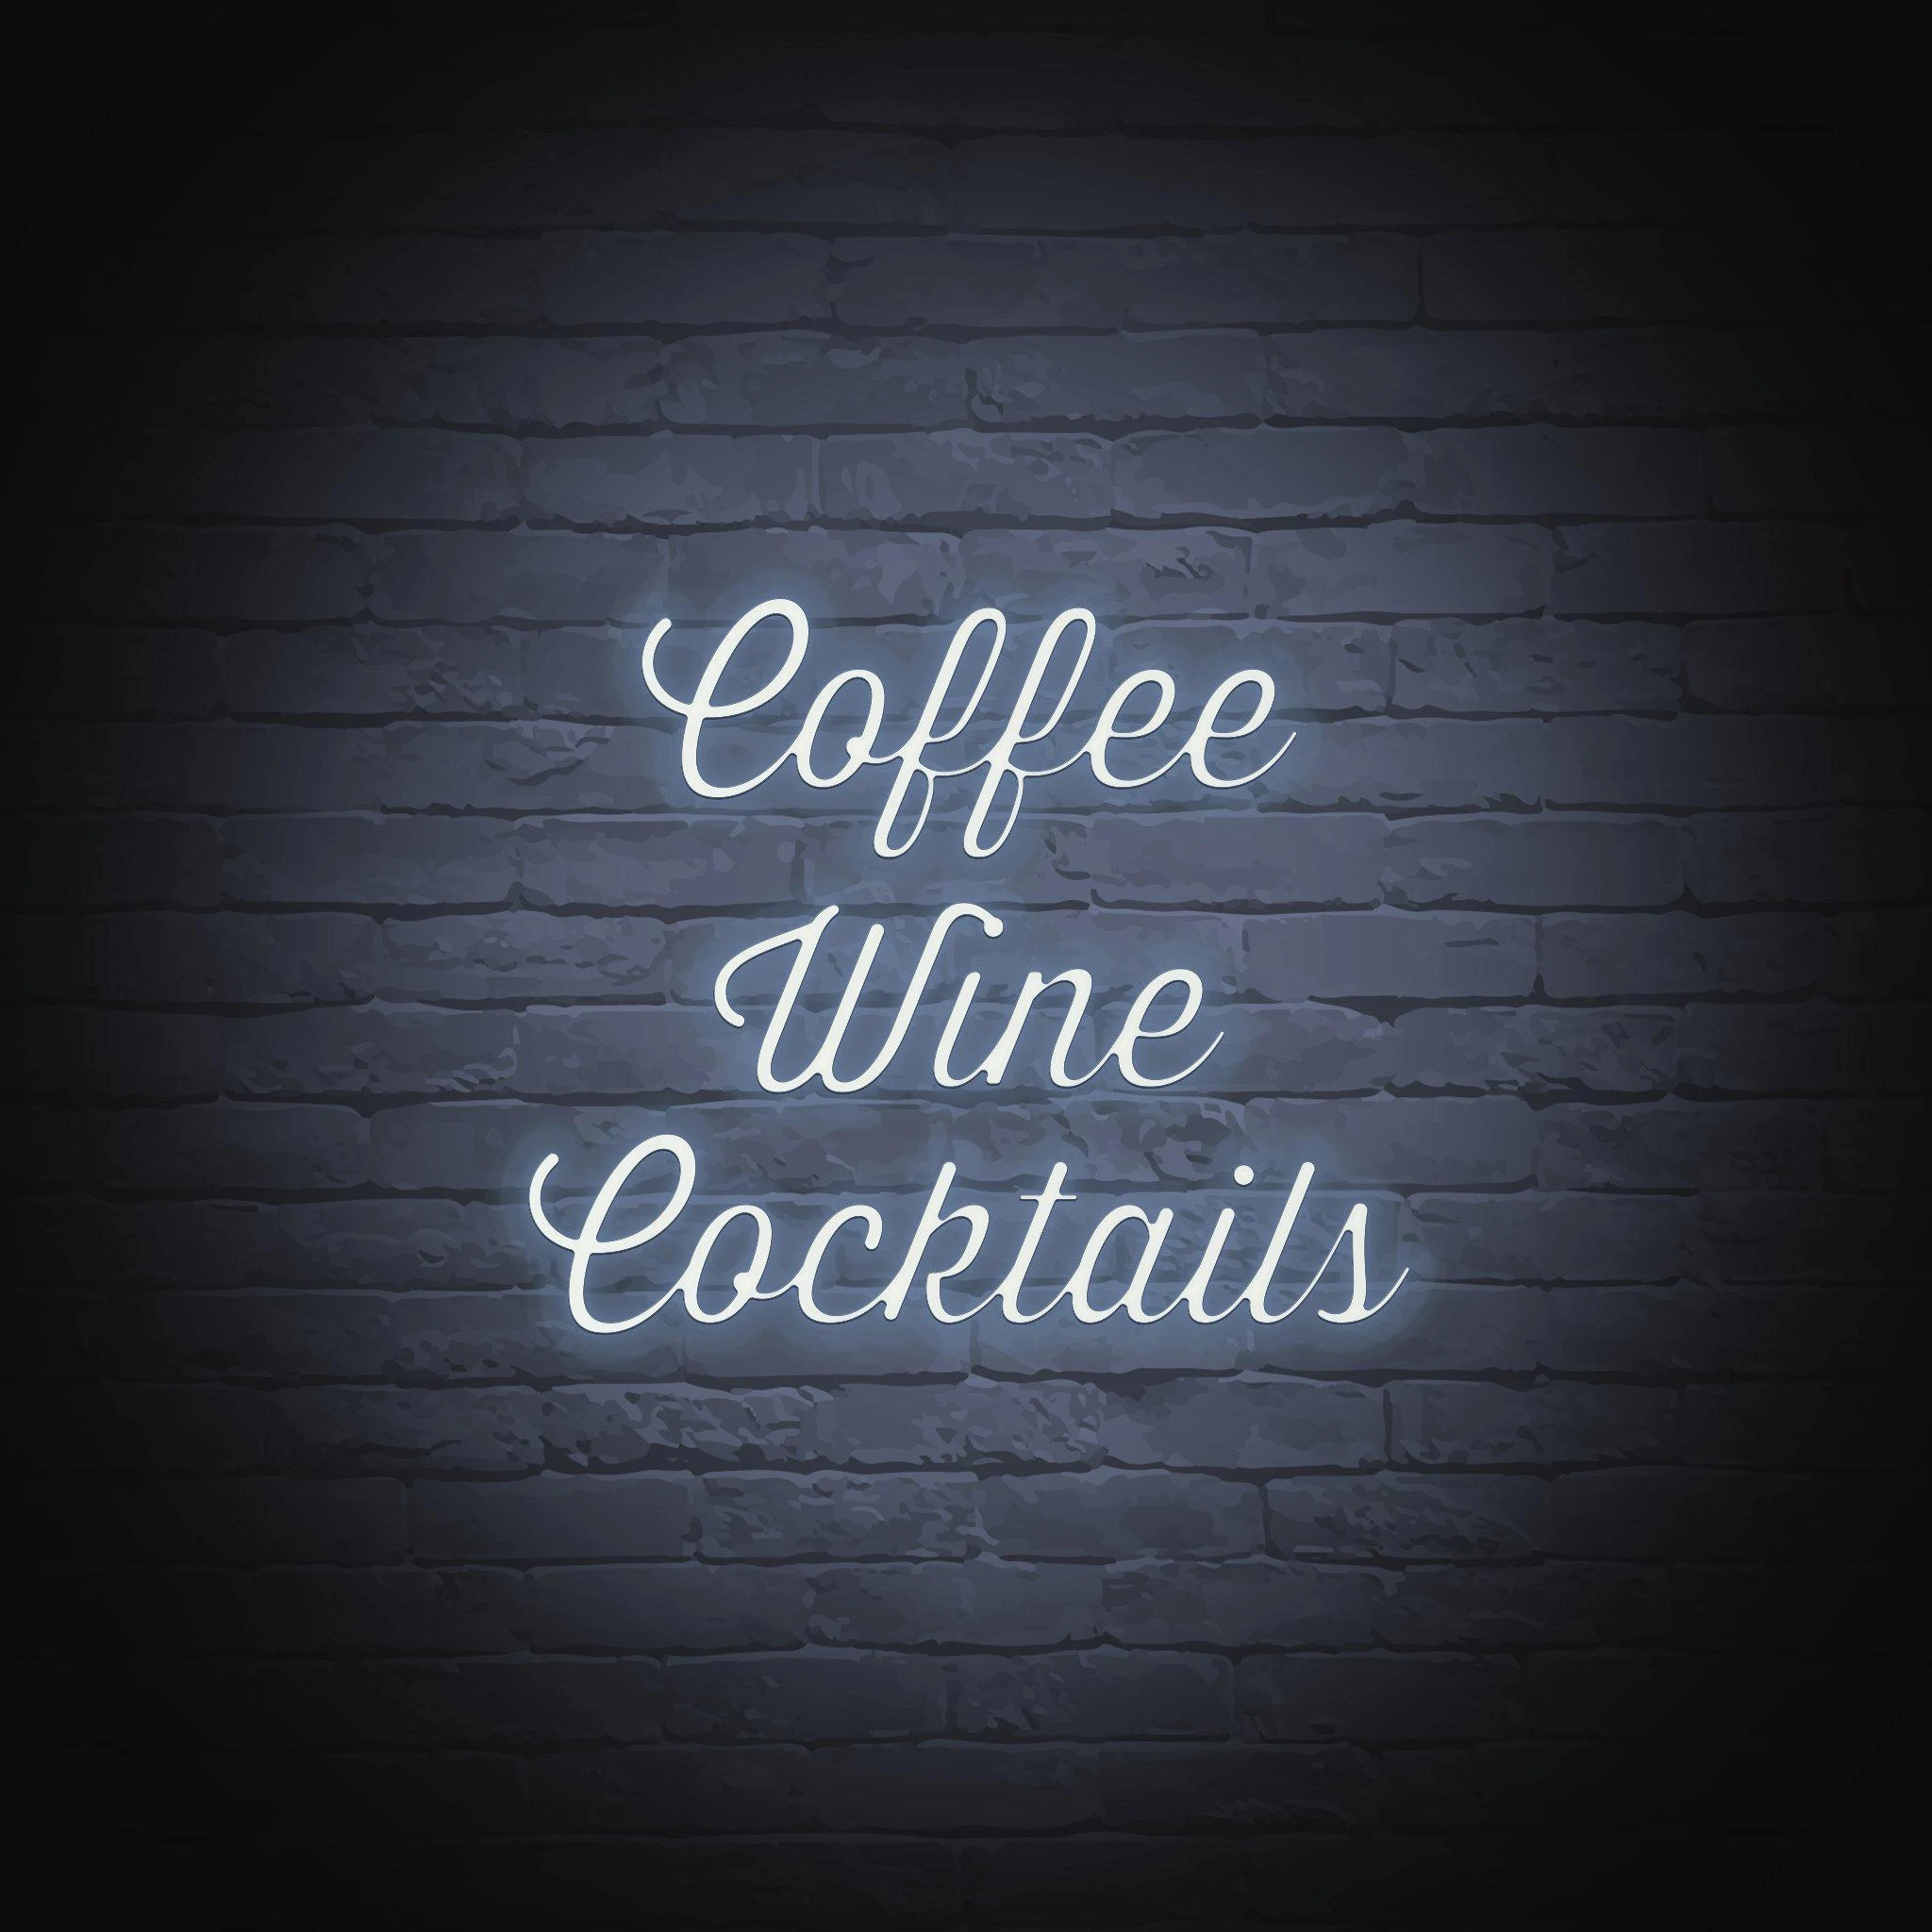 'COFFEE WINE COCKTAILS' NEON SIGN